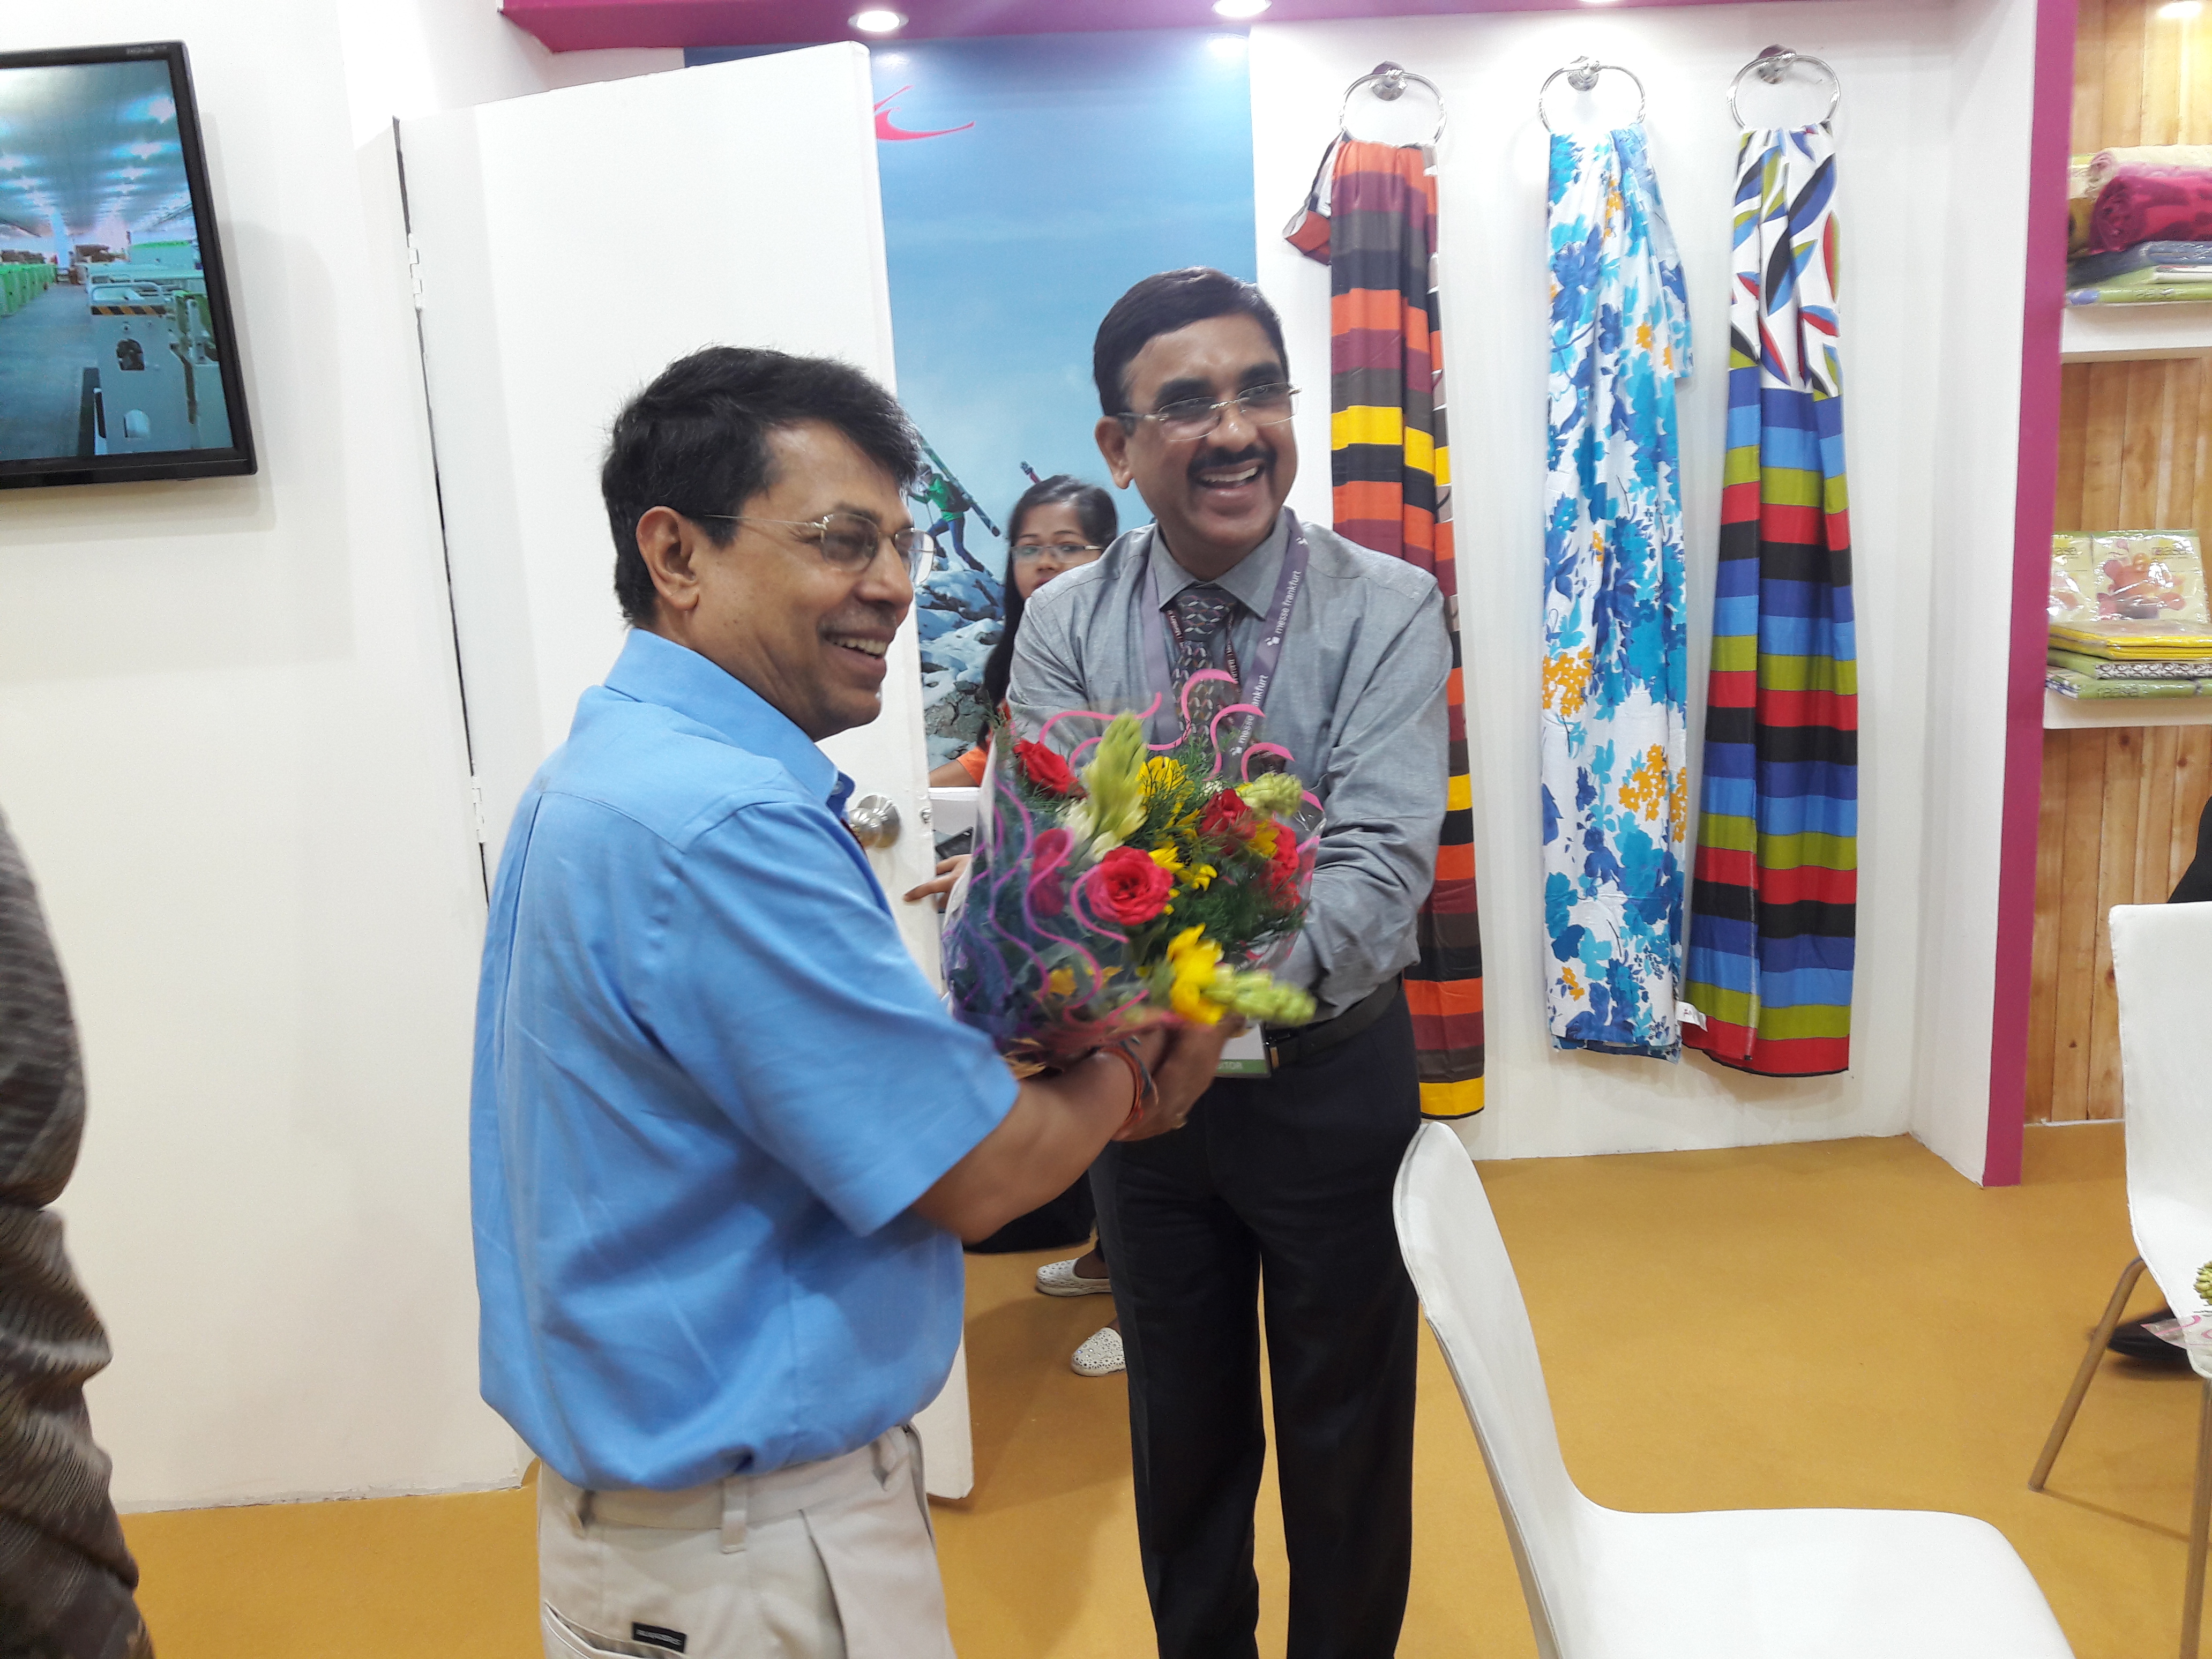 Shri P.C Vaish, CMD, NTCL welcoming Development Commisioner (Handicrafts) to NTCL Stallwith a bouquet of Flowers.